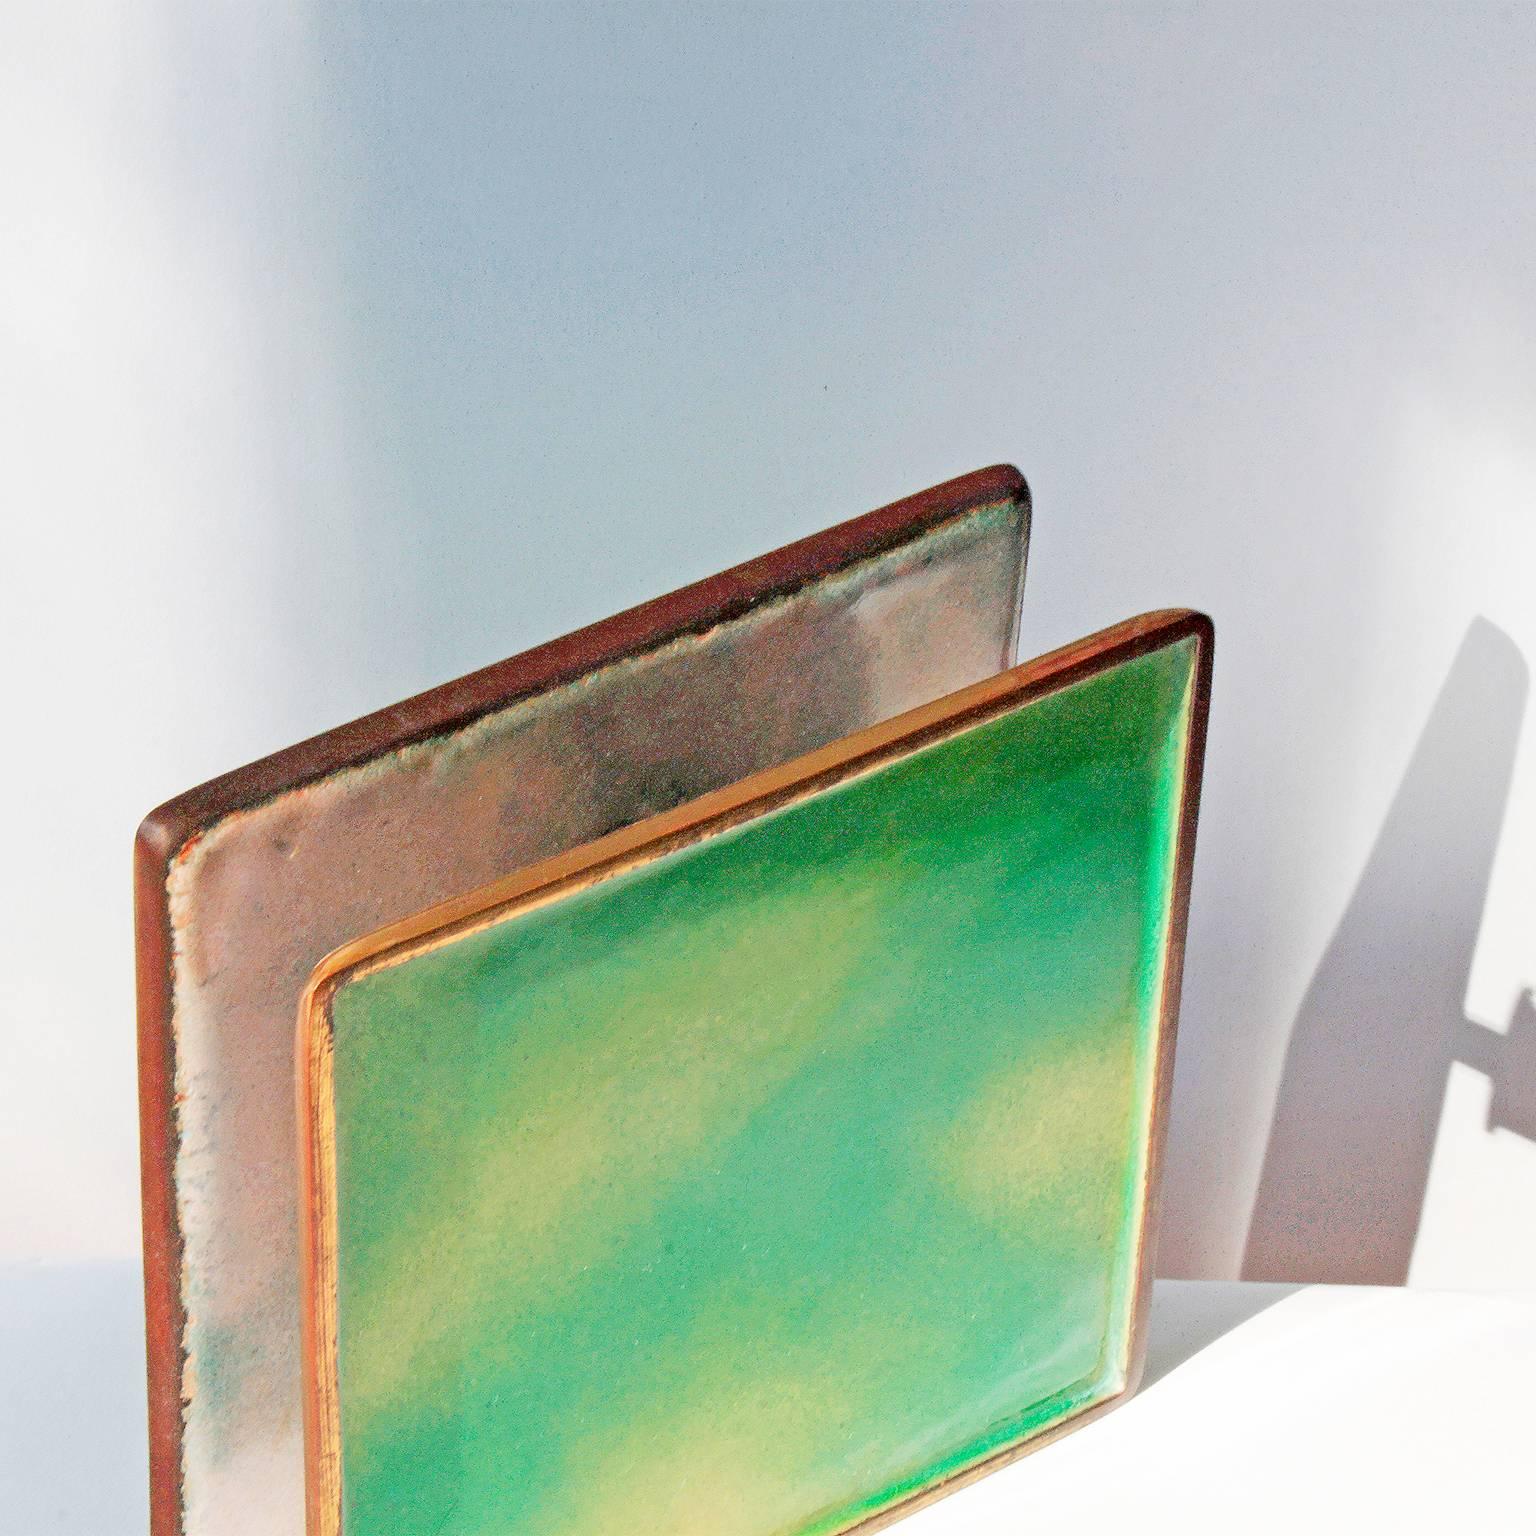 Spectacular door handles in hand-polished enamel on brass created in collaboration by two of Italy's most important 20th century designers, Gio Ponti and Paolo De Poli. This example features a fresh green glaze on the exterior surfaces and a